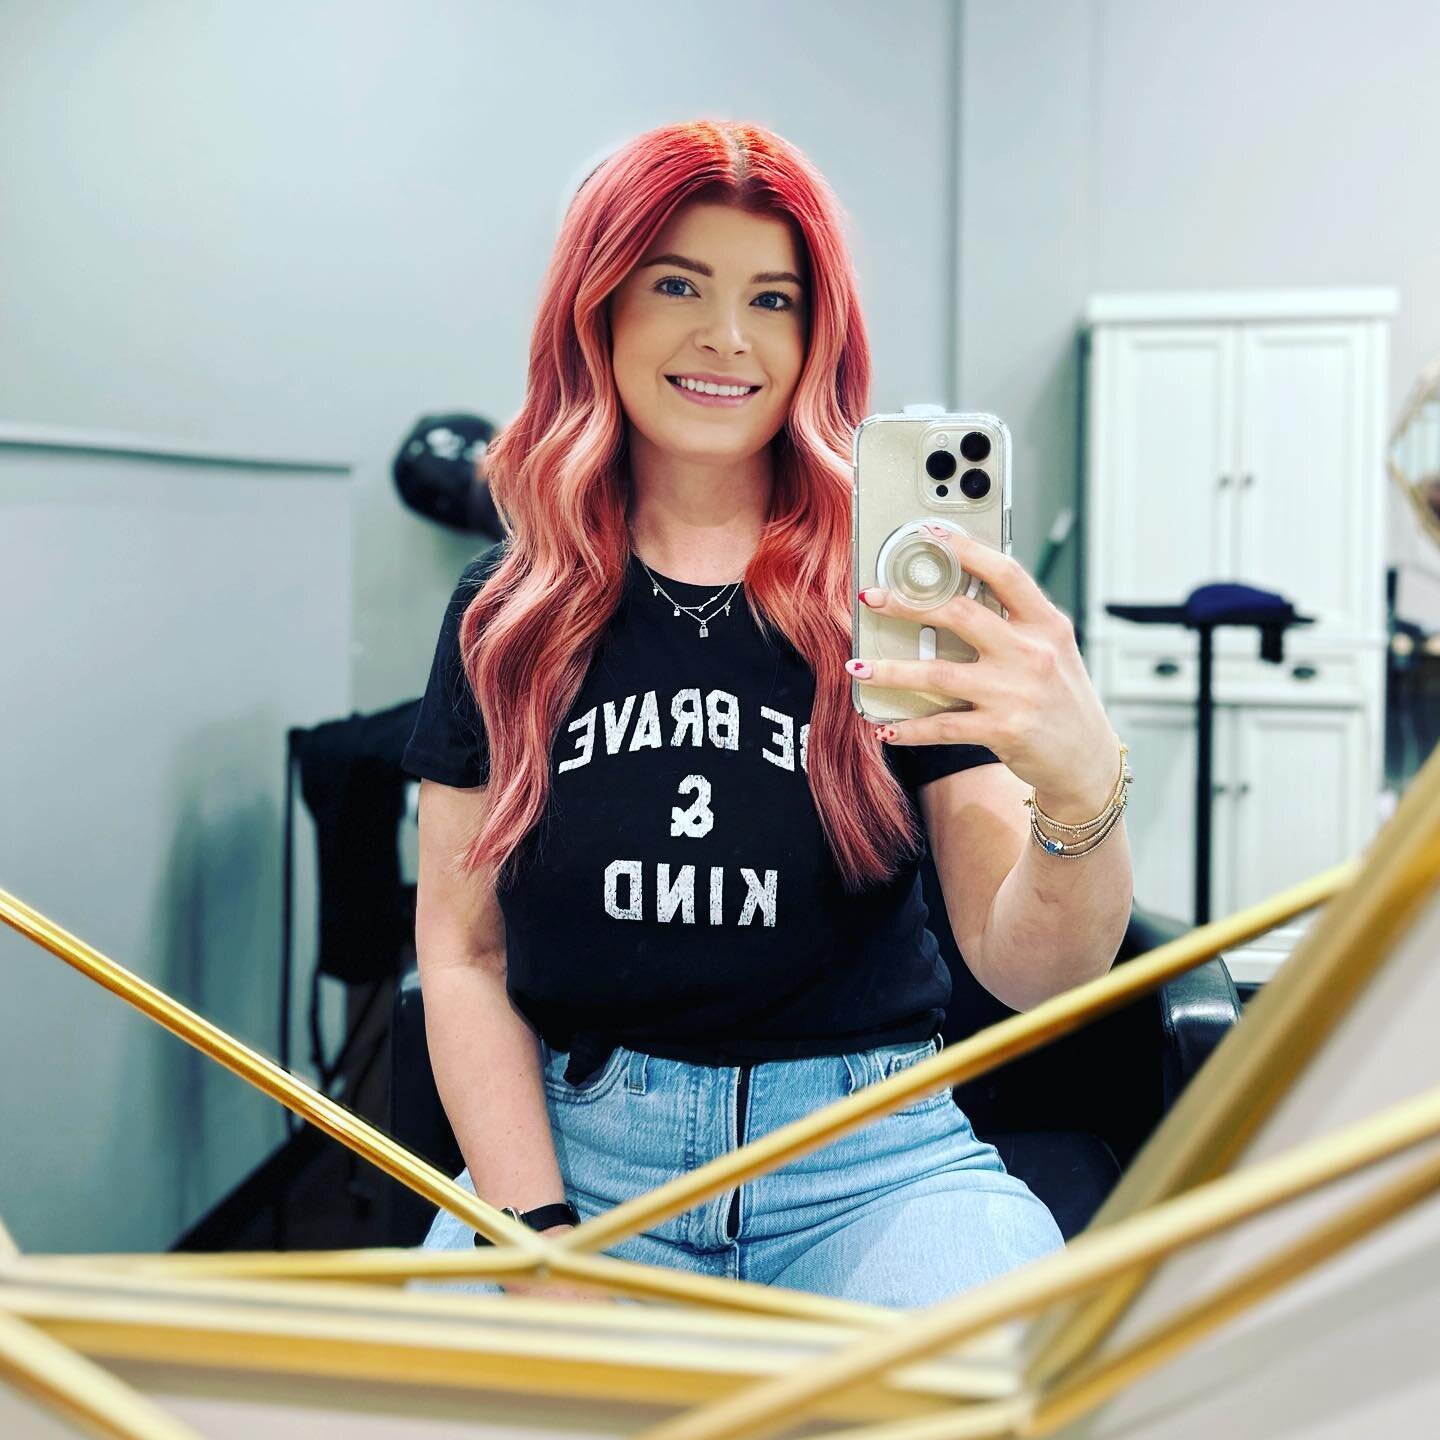 Two Truths &amp; A Lie&hellip; Post your guess in the comments! (Guess the lie!)⬇️⬇️⬇️

✨ I dropped out of Art School. 🎨
✨ My natural hair color is brown. 🤎
✨ My favorite music is rap/hip hop &amp; EDM 🕺💃🏼

Happy Fri-YAY! 🥳

#salonlife #redhair